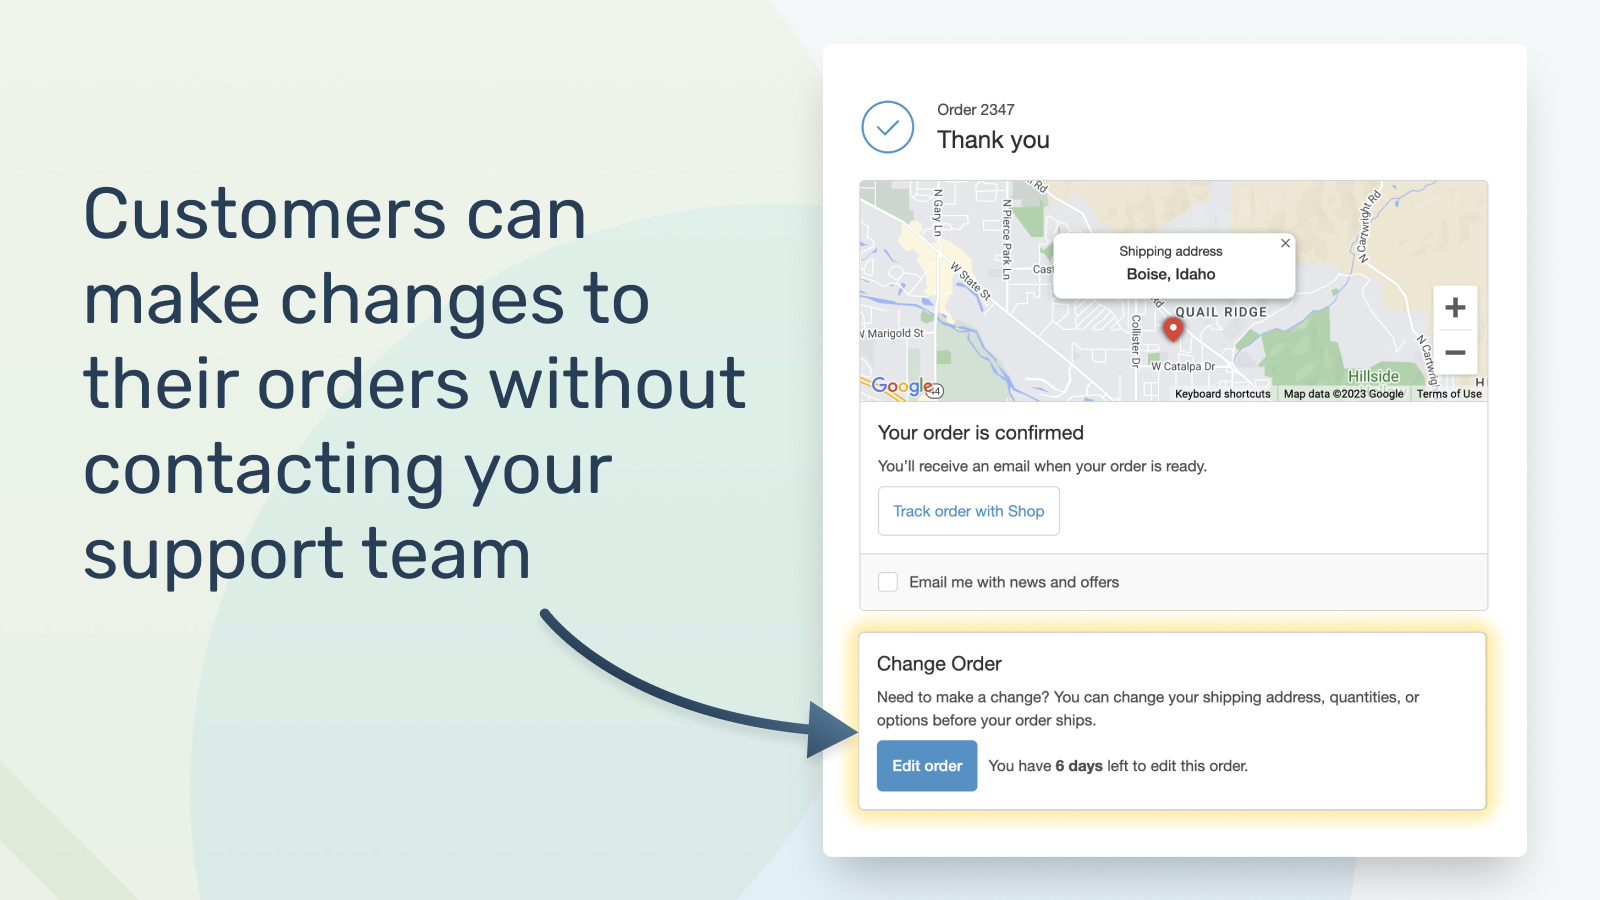 Customers can change their orders without contacting support